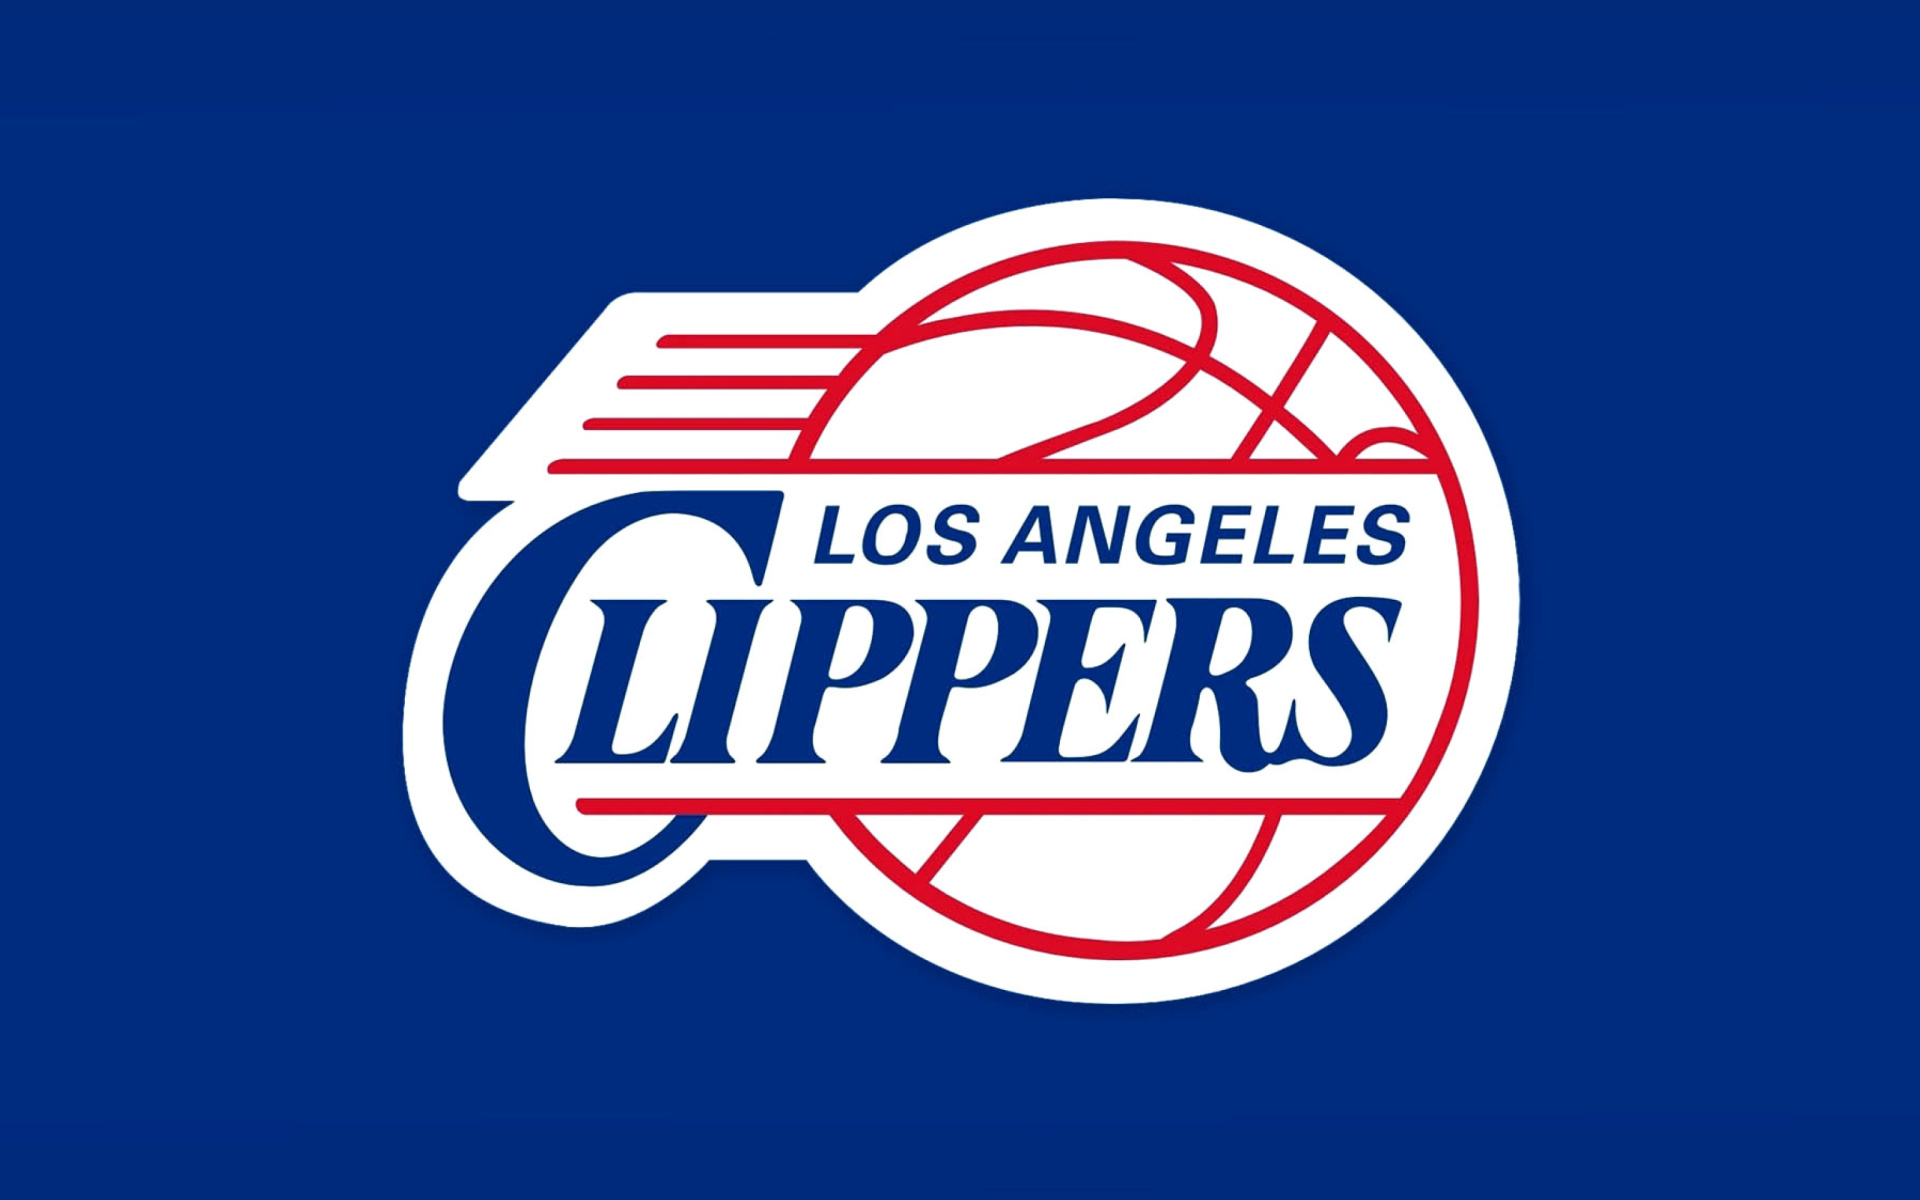 Los Angeles Clippers screenshot #1 1920x1200